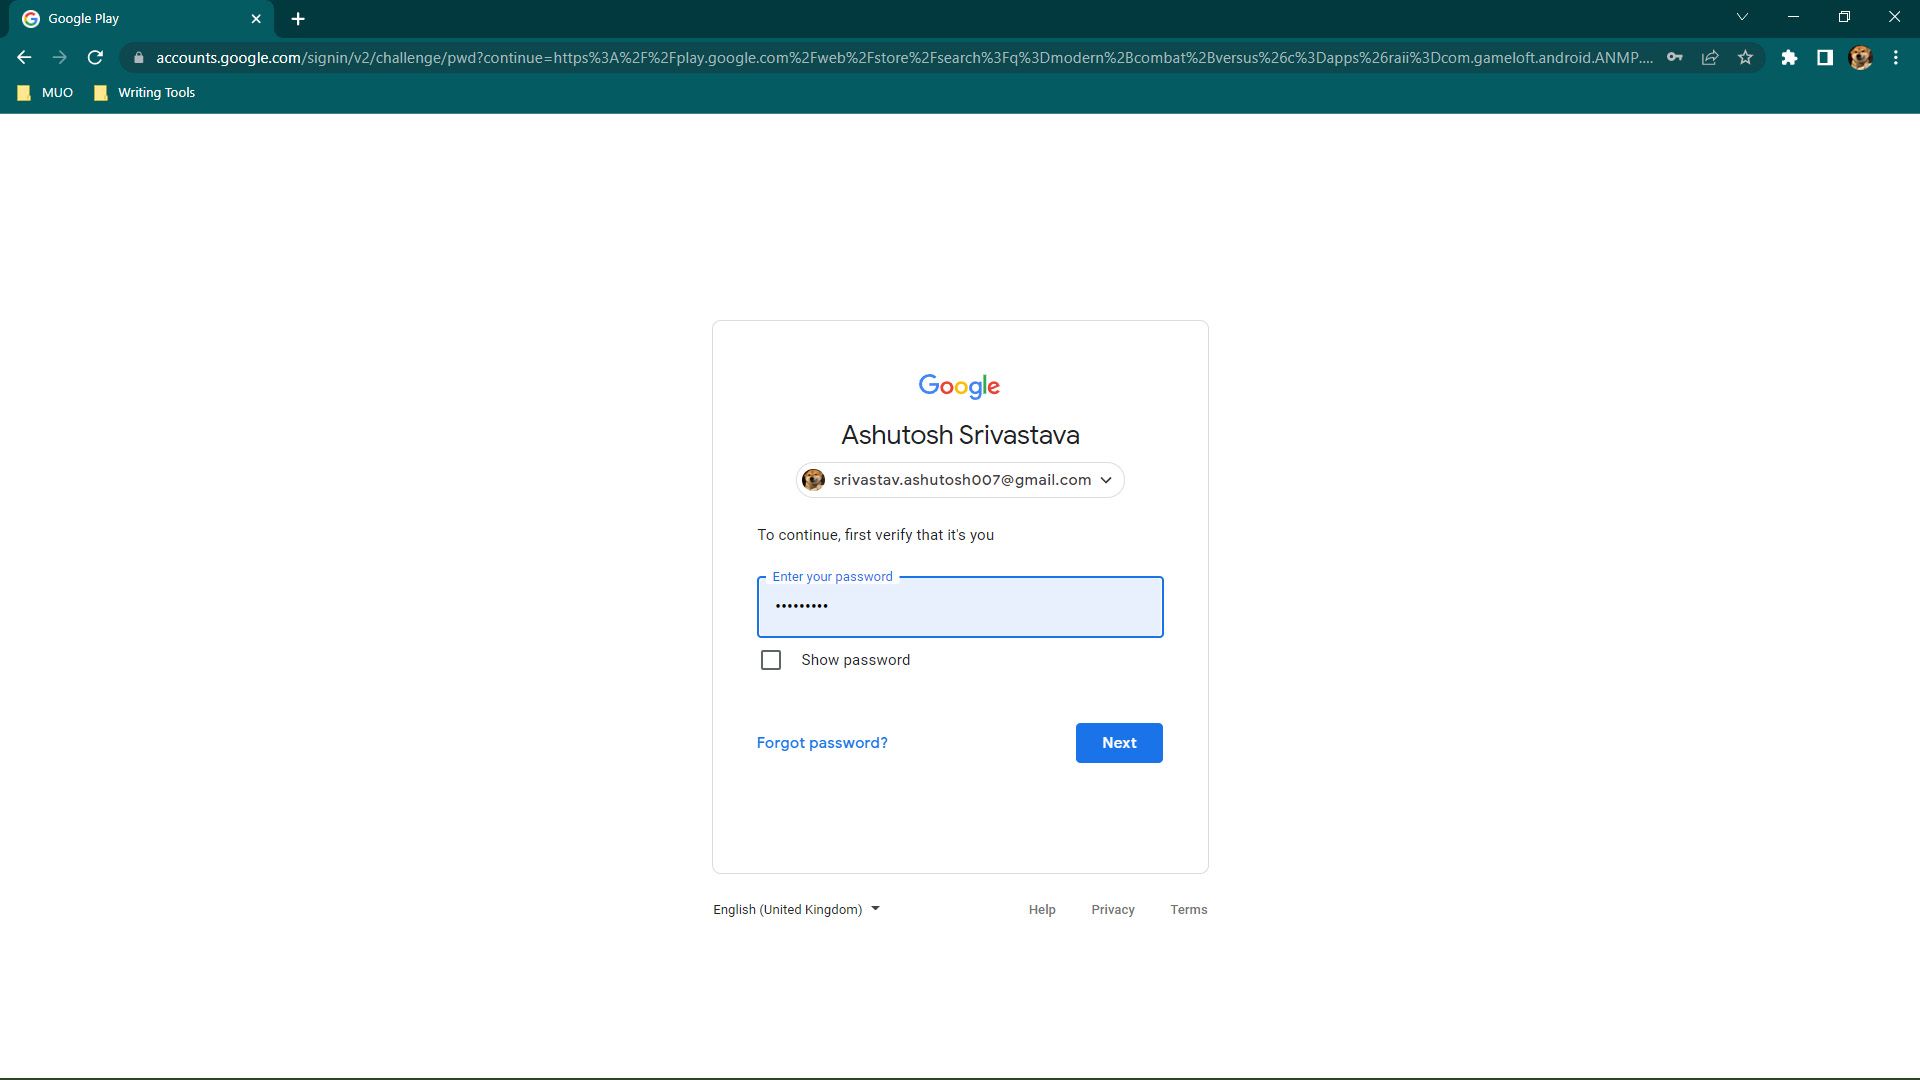 Authentication using your Google account